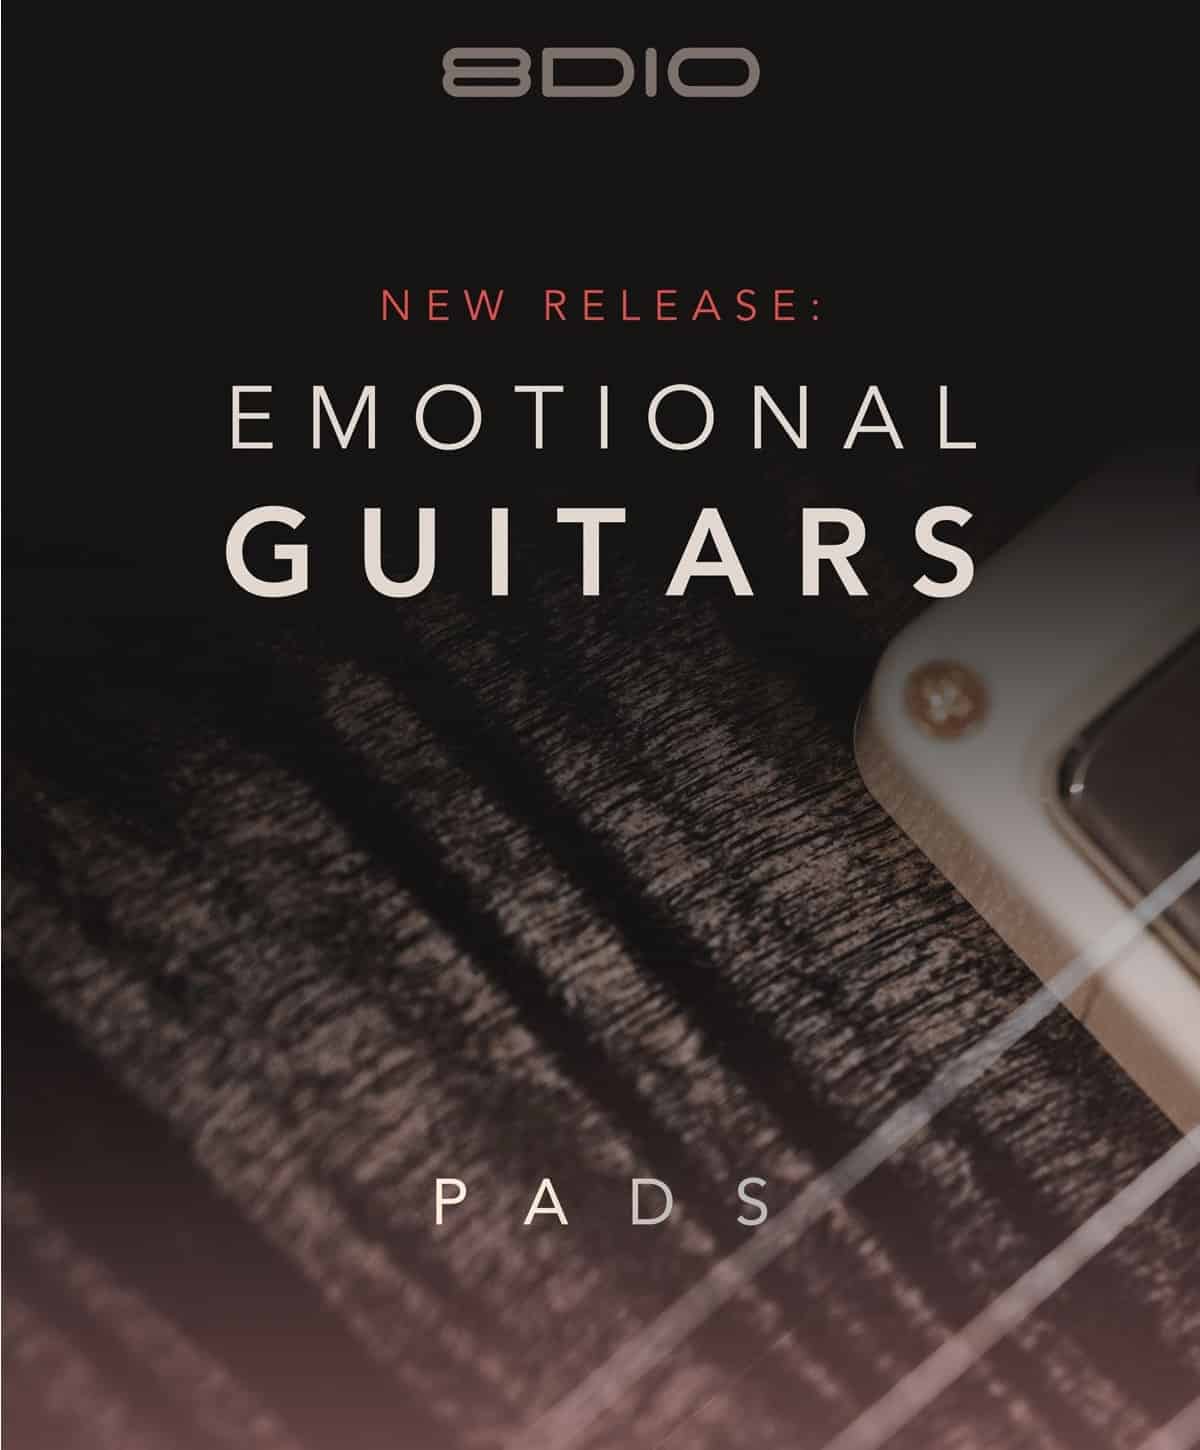 8Dio launches Emotional Guitars Pads